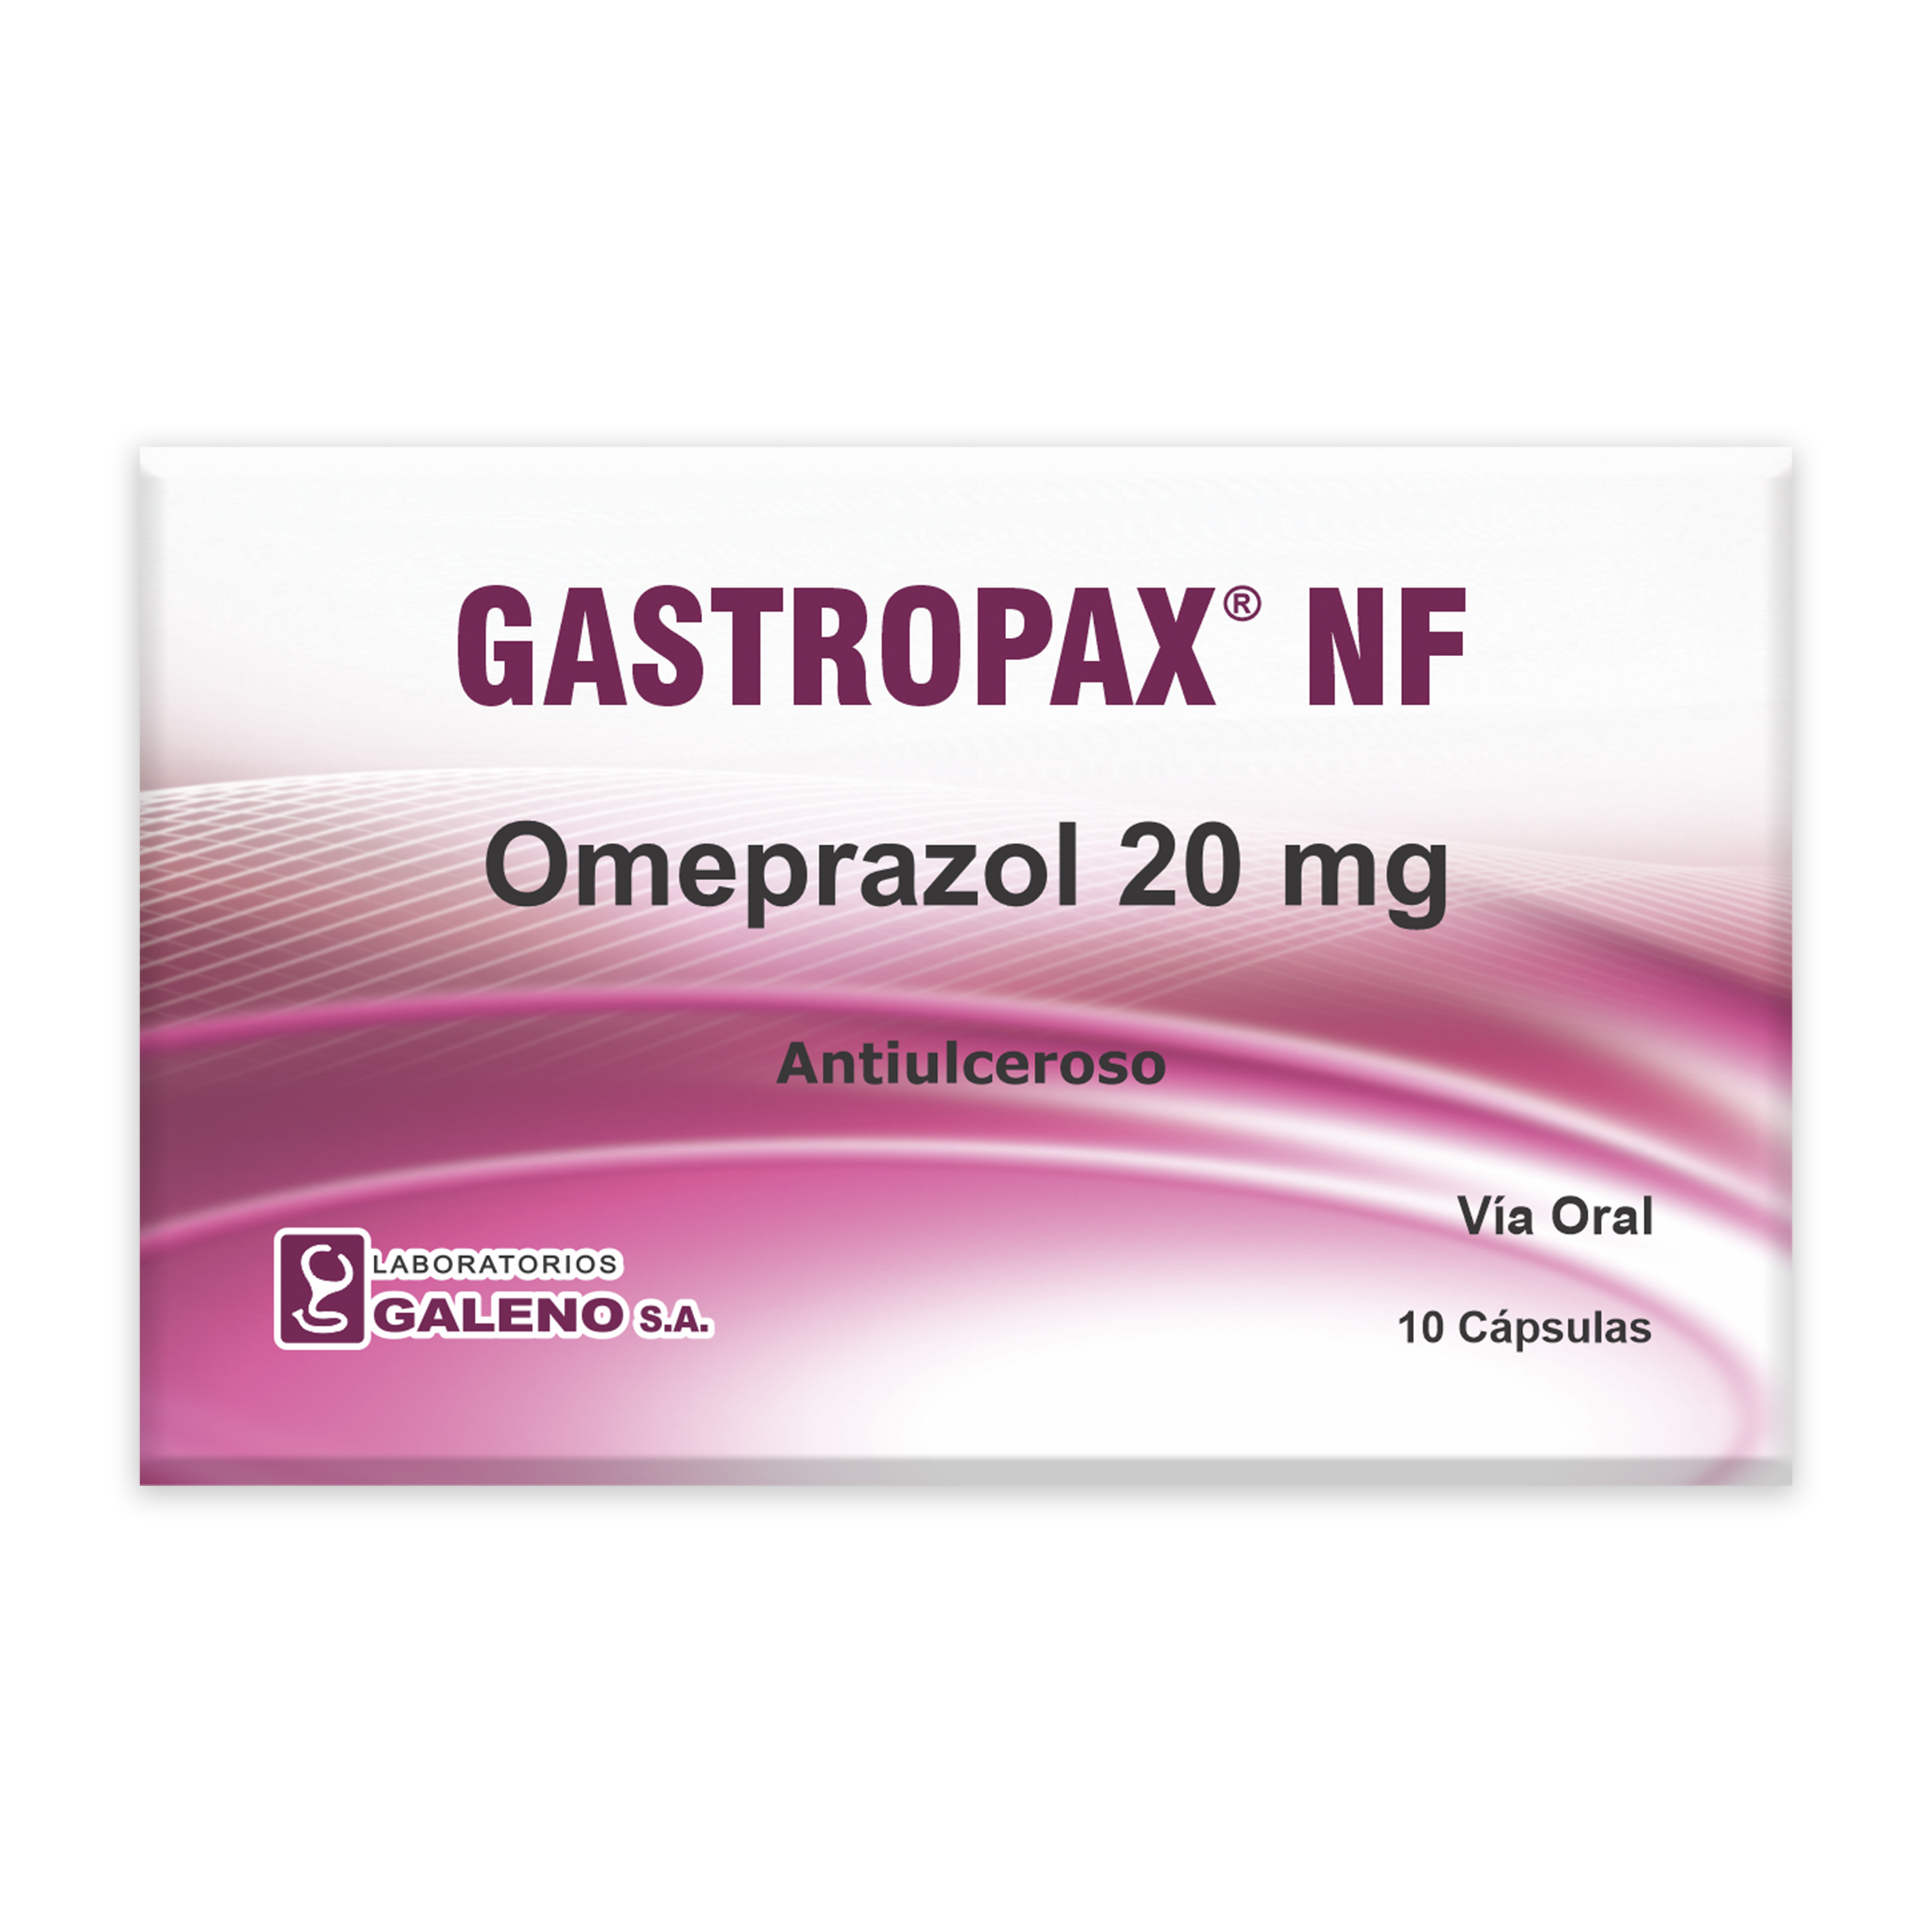 GASTROPAX NF